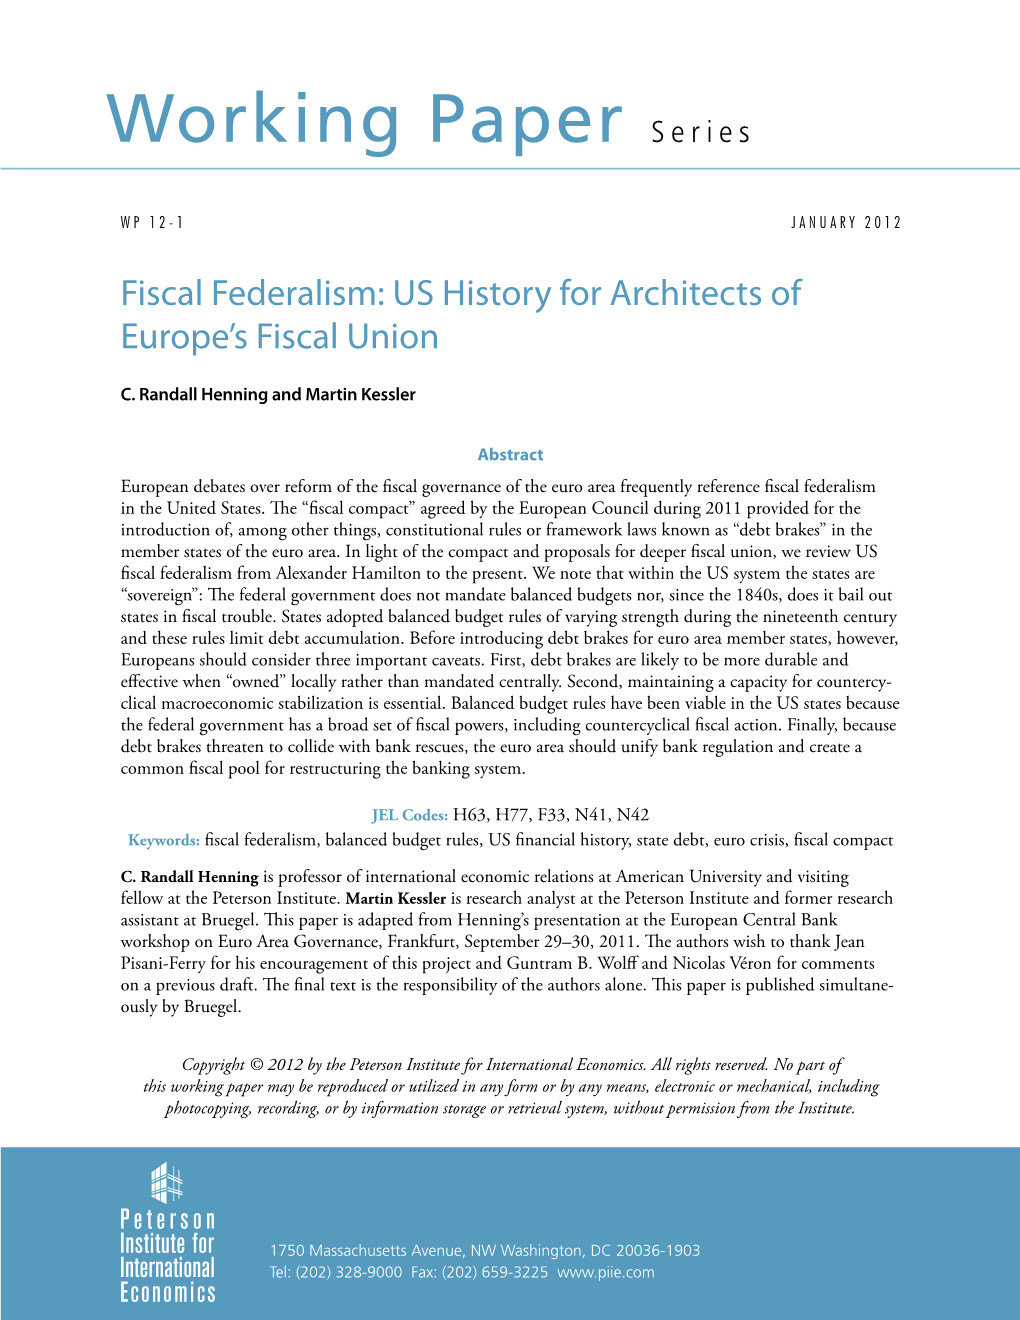 Fiscal Federalism: US History for Architects of Europe’S Fiscal Union